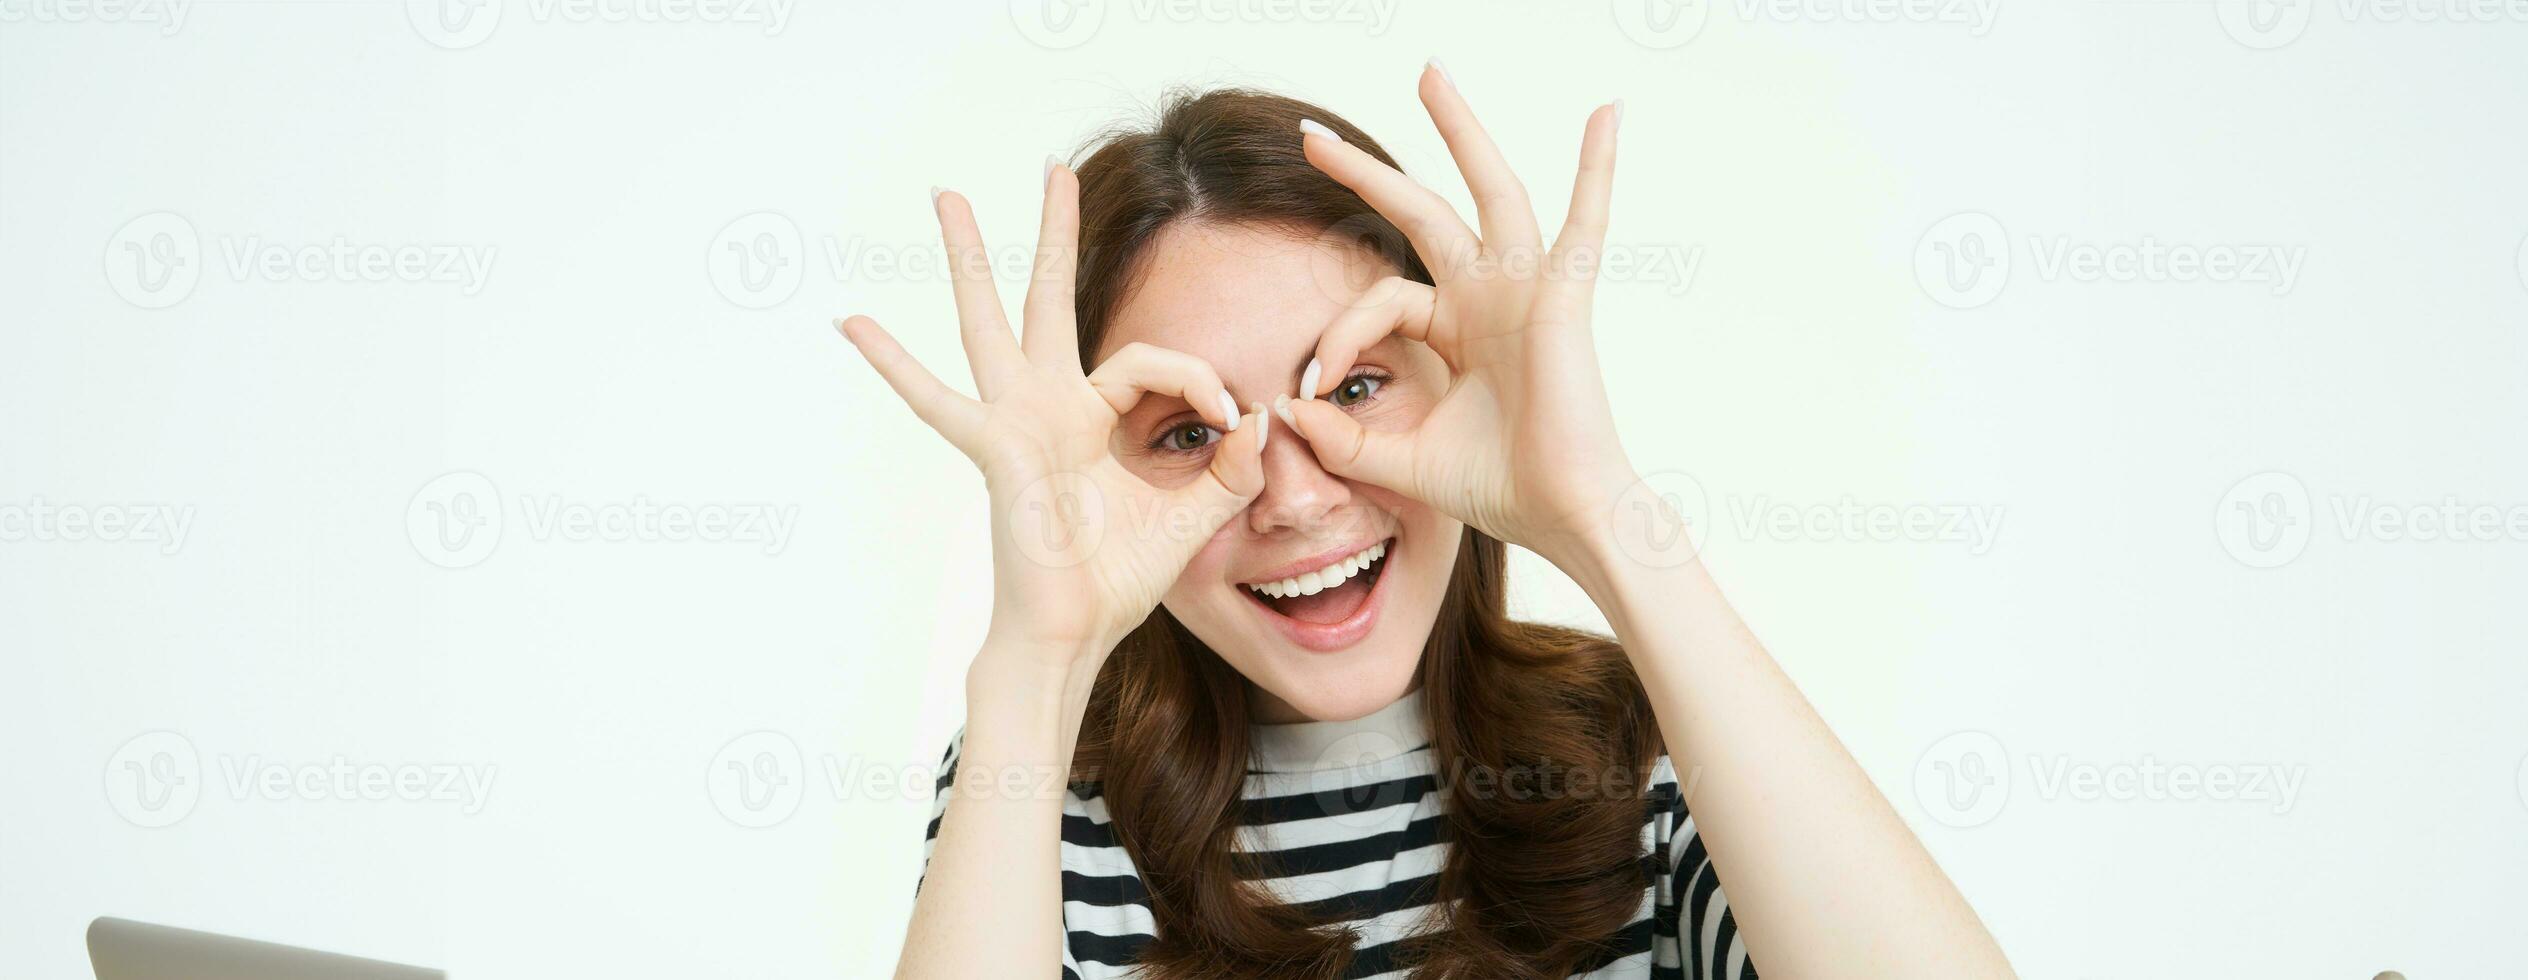 Portrait of happy, beautiful young woman, makes glasses with fingers around eyes and laughing, having fun, enjoying event, standing over white background photo